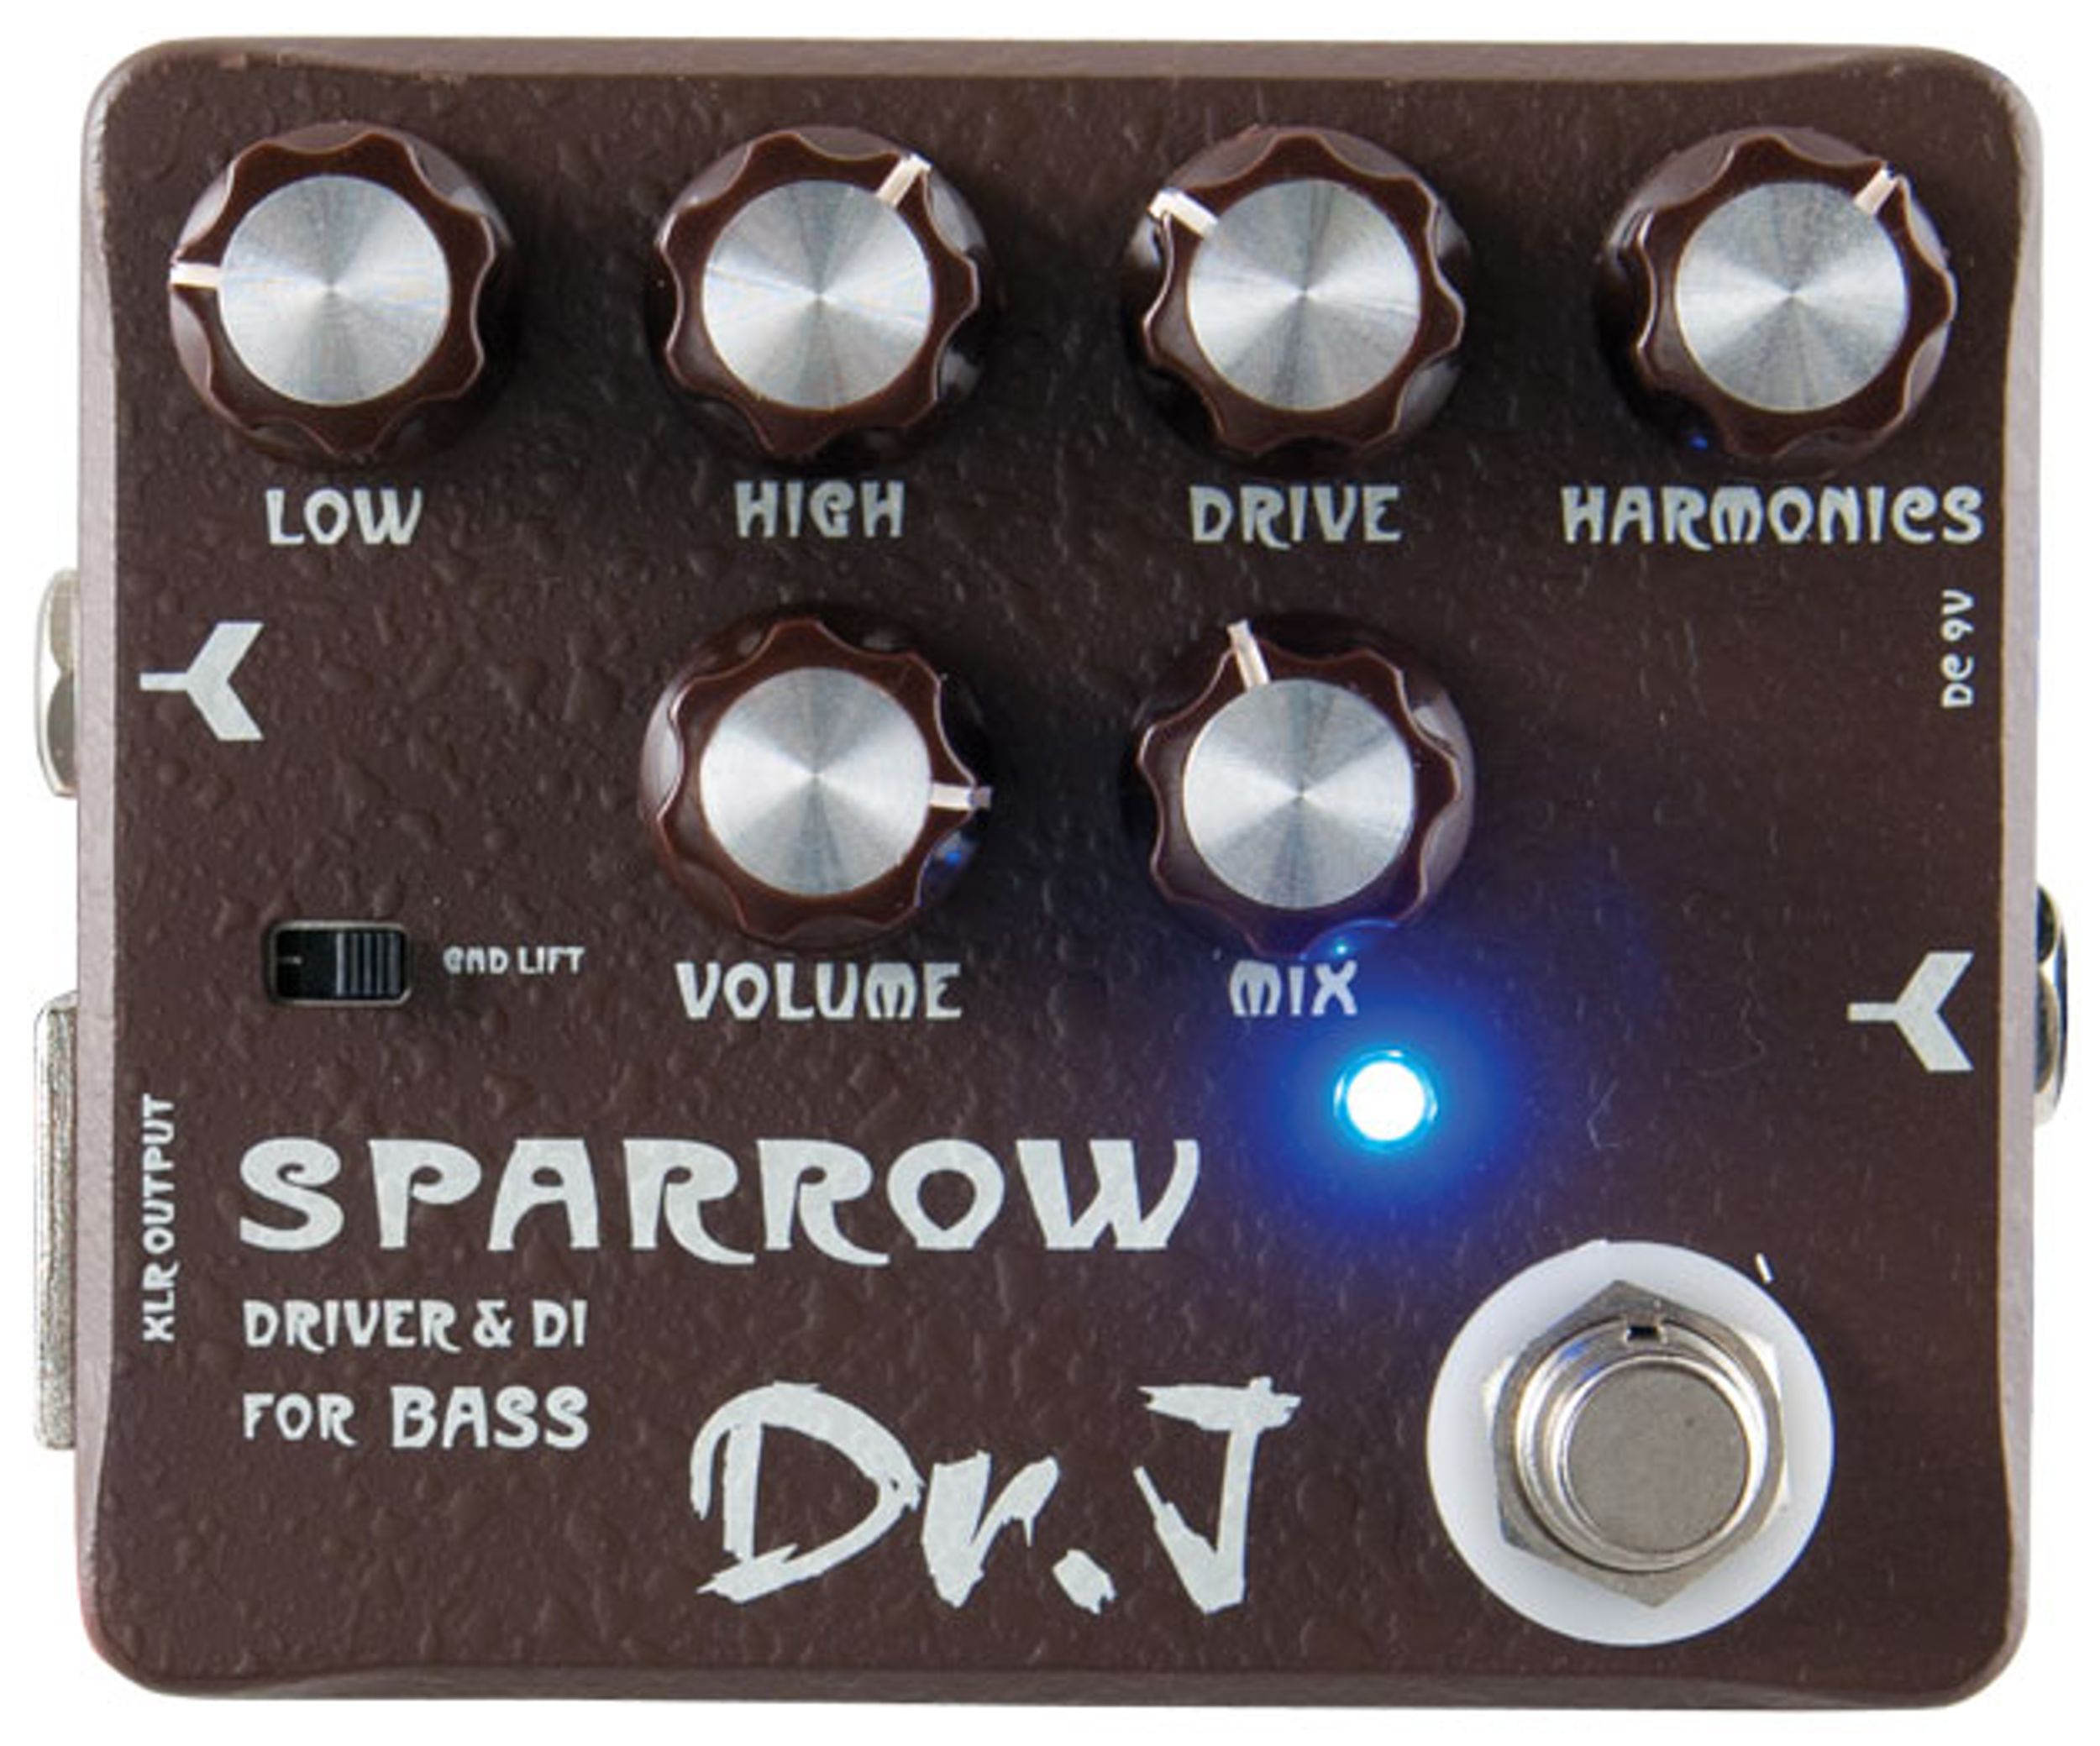 Dr. J D53 Sparrow Driver and DI Review